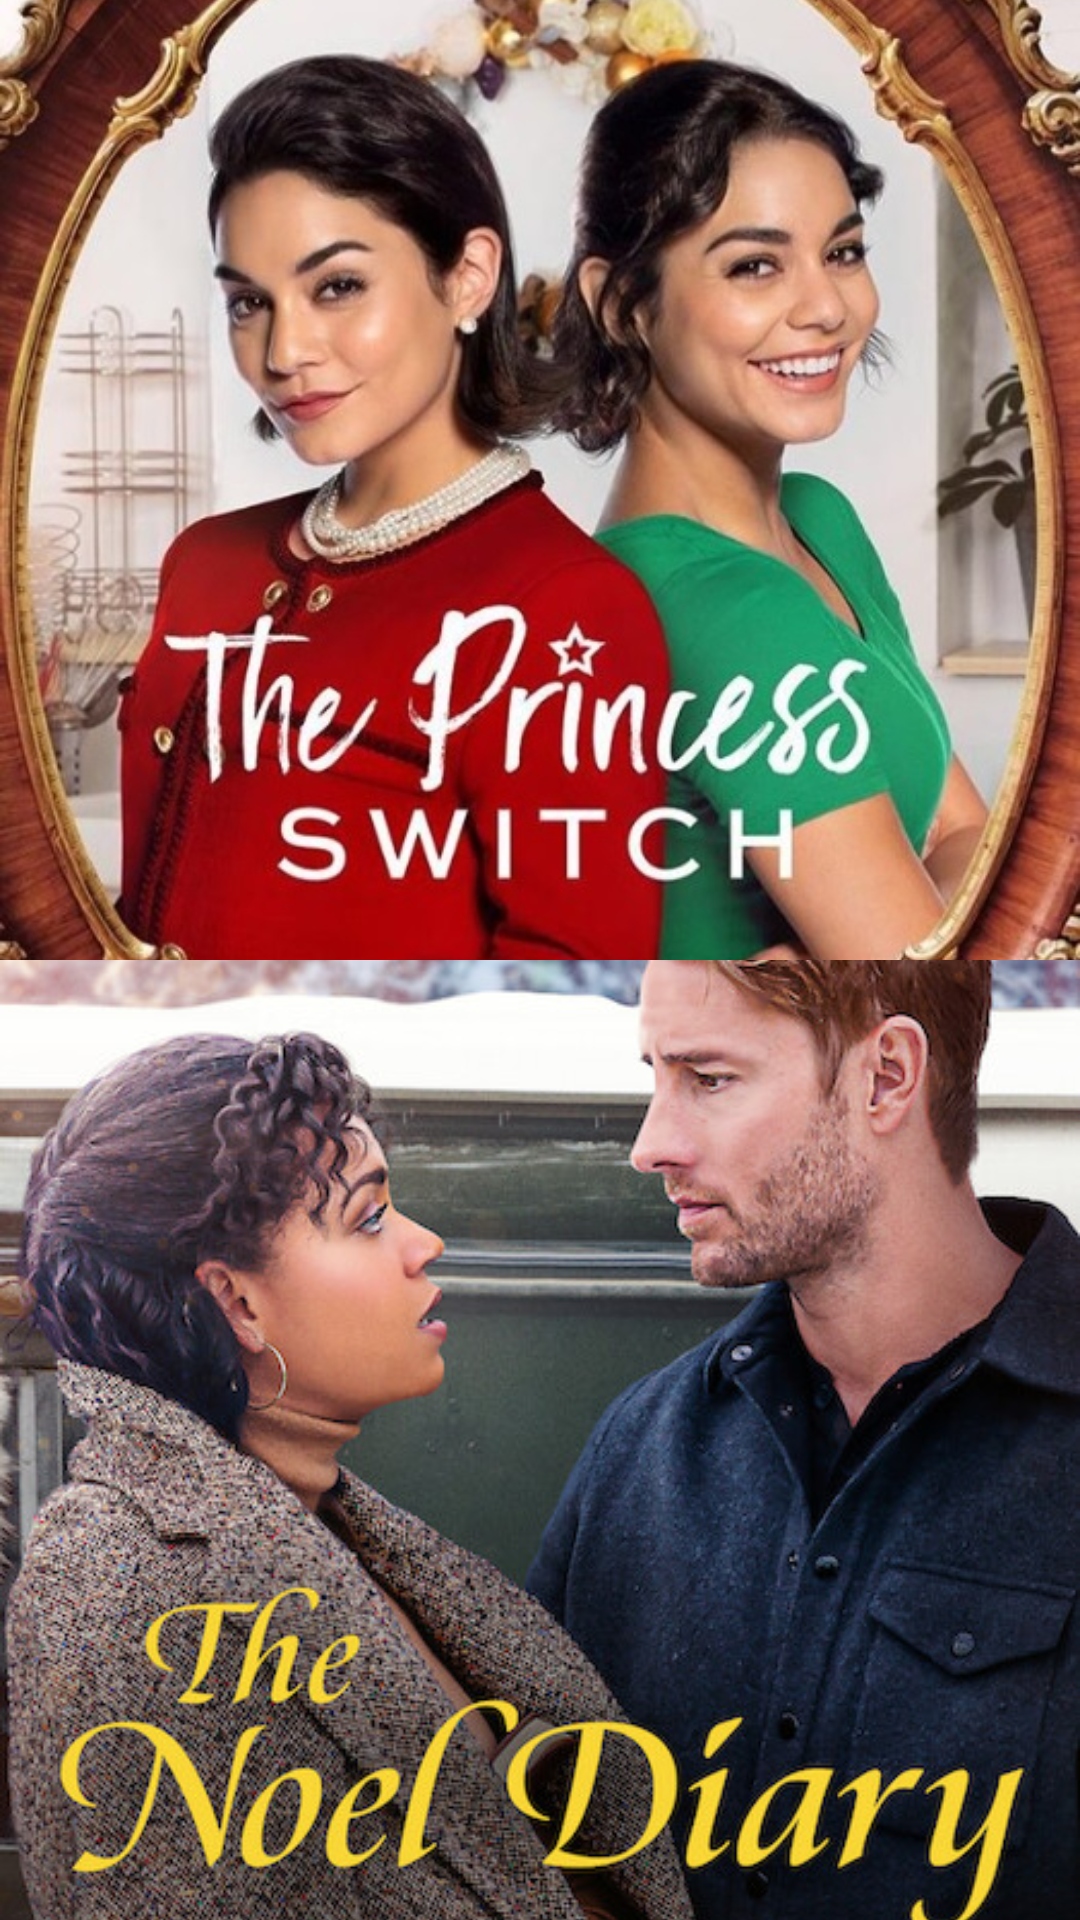 The Princess Switch to The Noel Diary: Fairy Tale romantic movies you shouldn't miss during Christmas